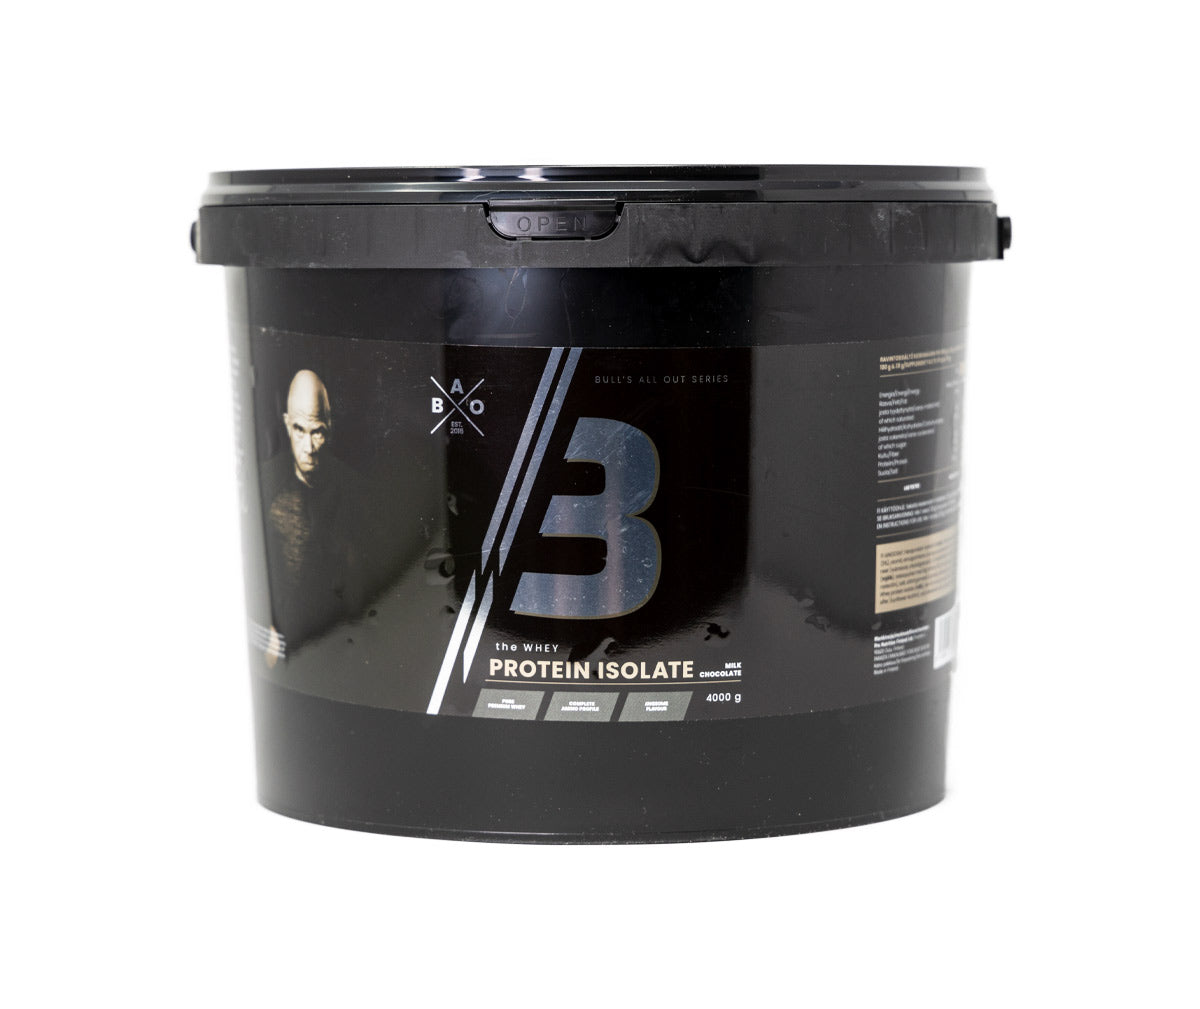 BAO The WHEY PROTEIN ISOLATE 4Kg